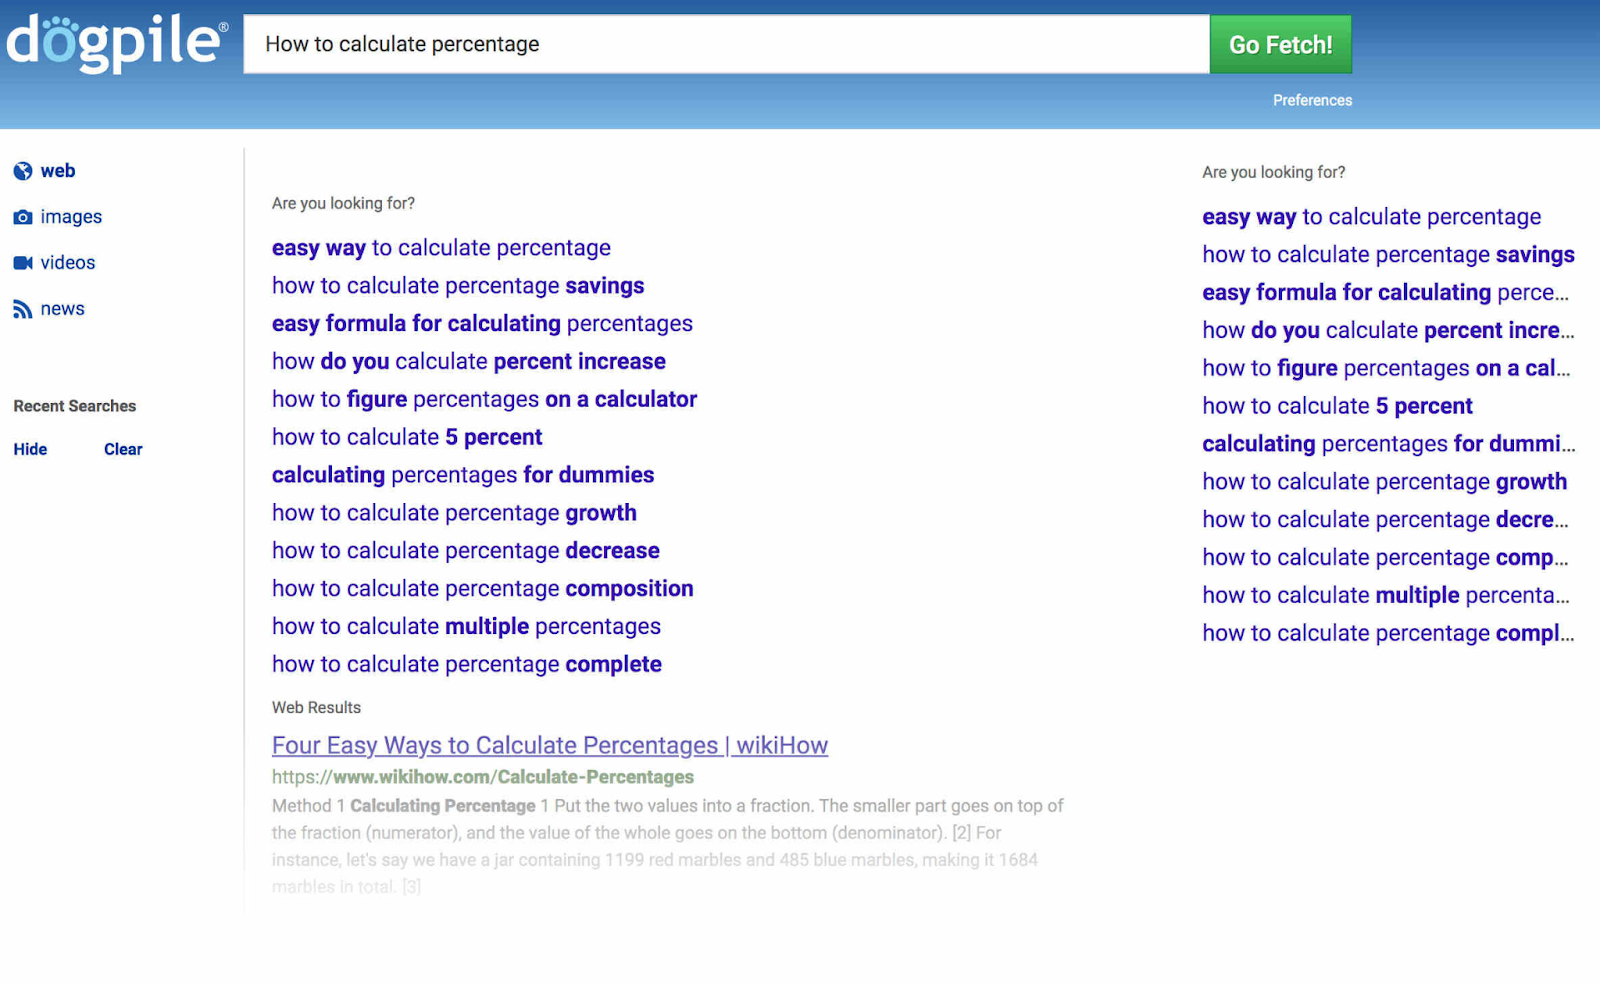 Dogpile’s search results for "how to calculate percentage"